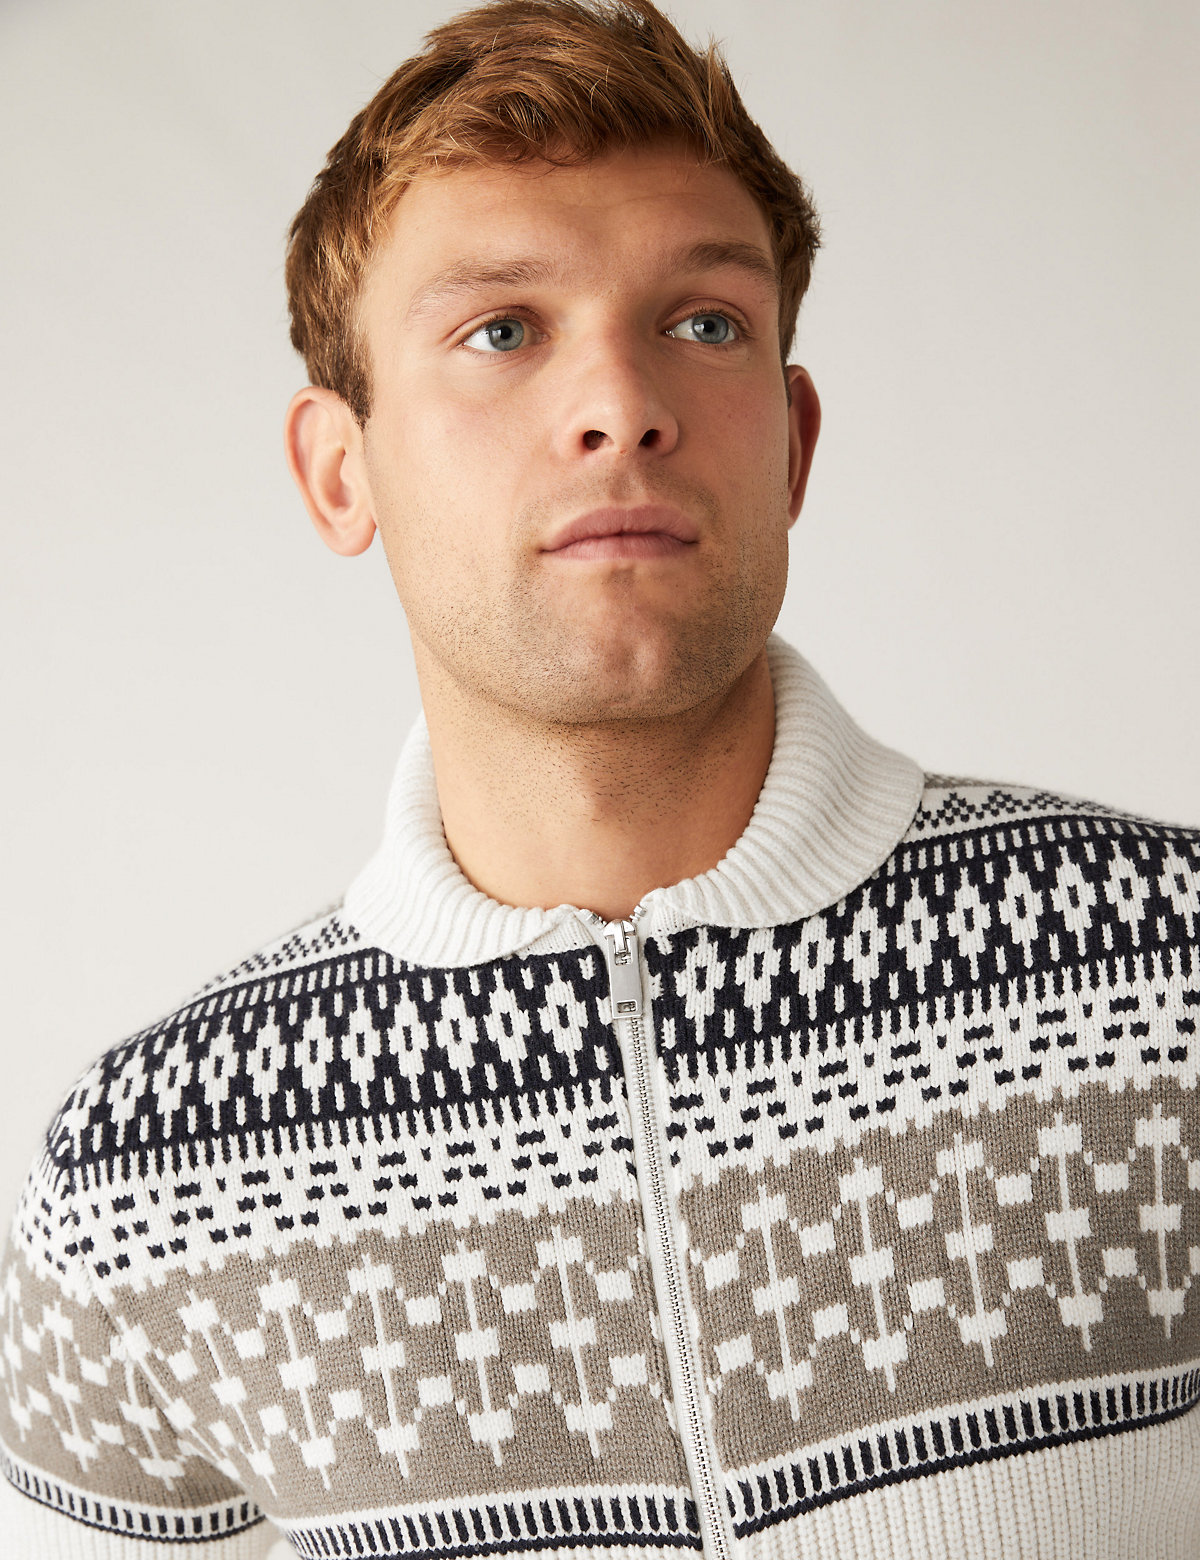 Cotton Blend Fair Isle Knitted Jacket